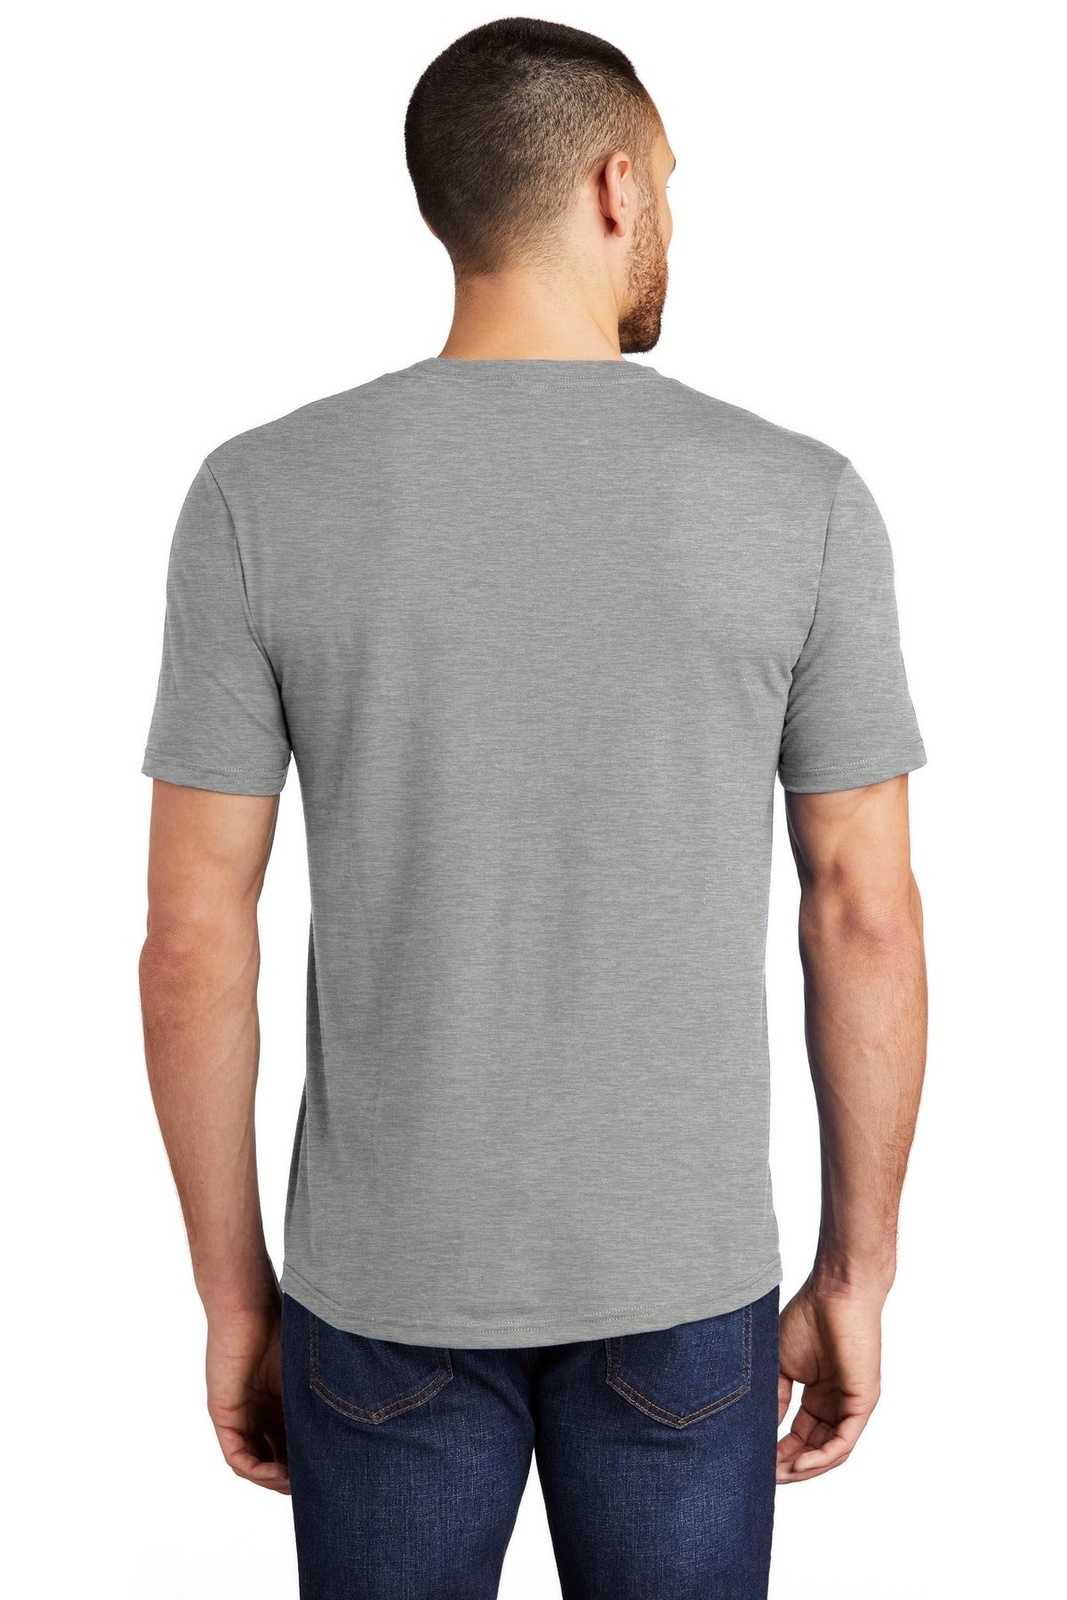 District DM130 Perfect Tri Tee - Heathered Gray - HIT a Double - 1